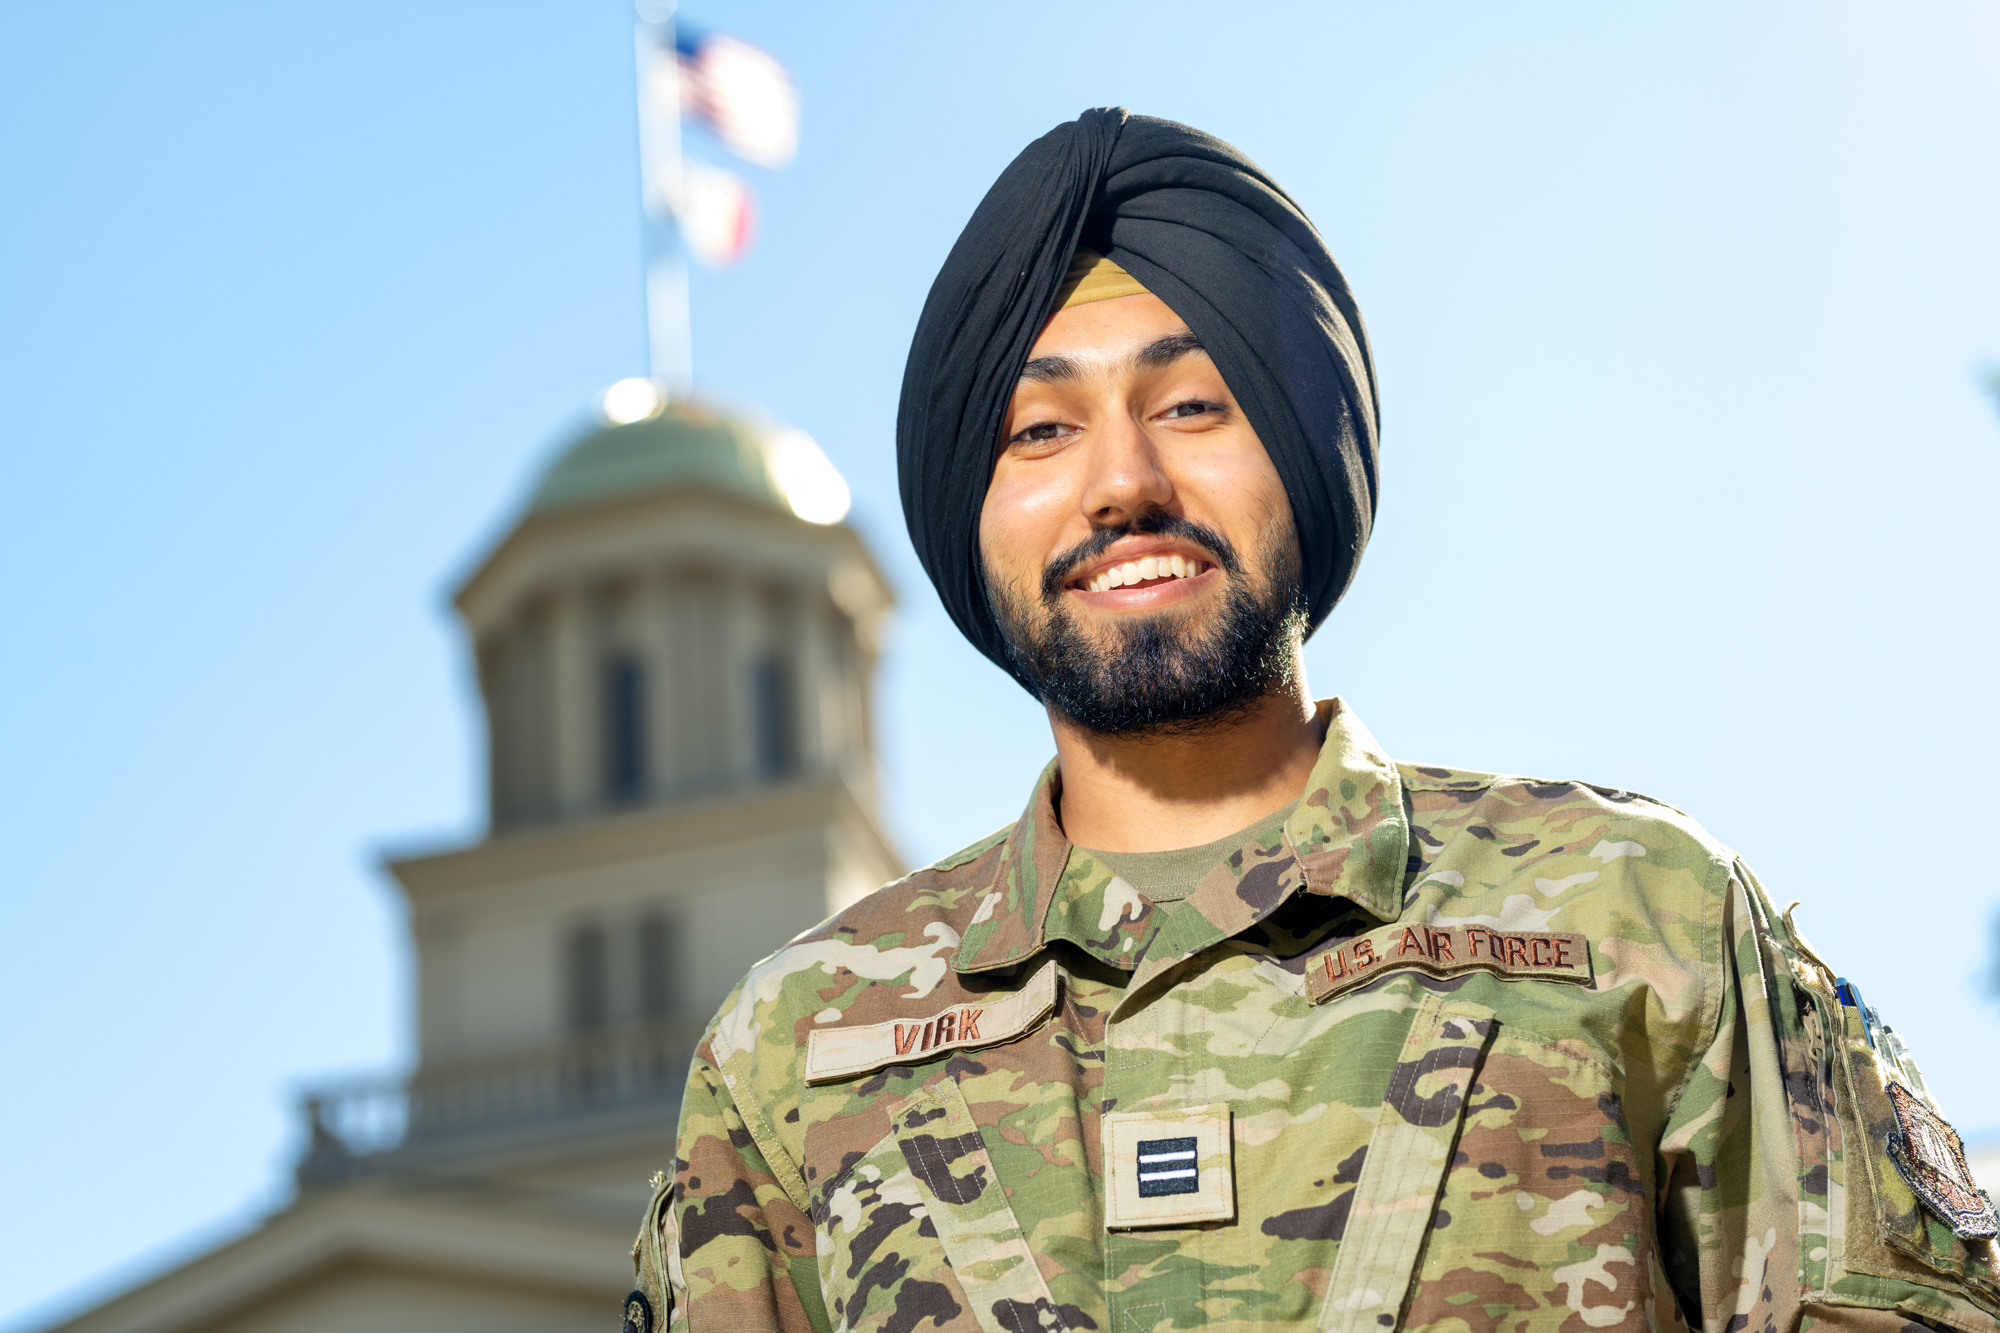 Gursharan Virk became the first Sikh Air Force cadet allowed to wear the turban, beard, and bracelet that are sacred religious symbols after he petitioned the Air Force asking that he be allowed to incorporate them into his military uniform.  